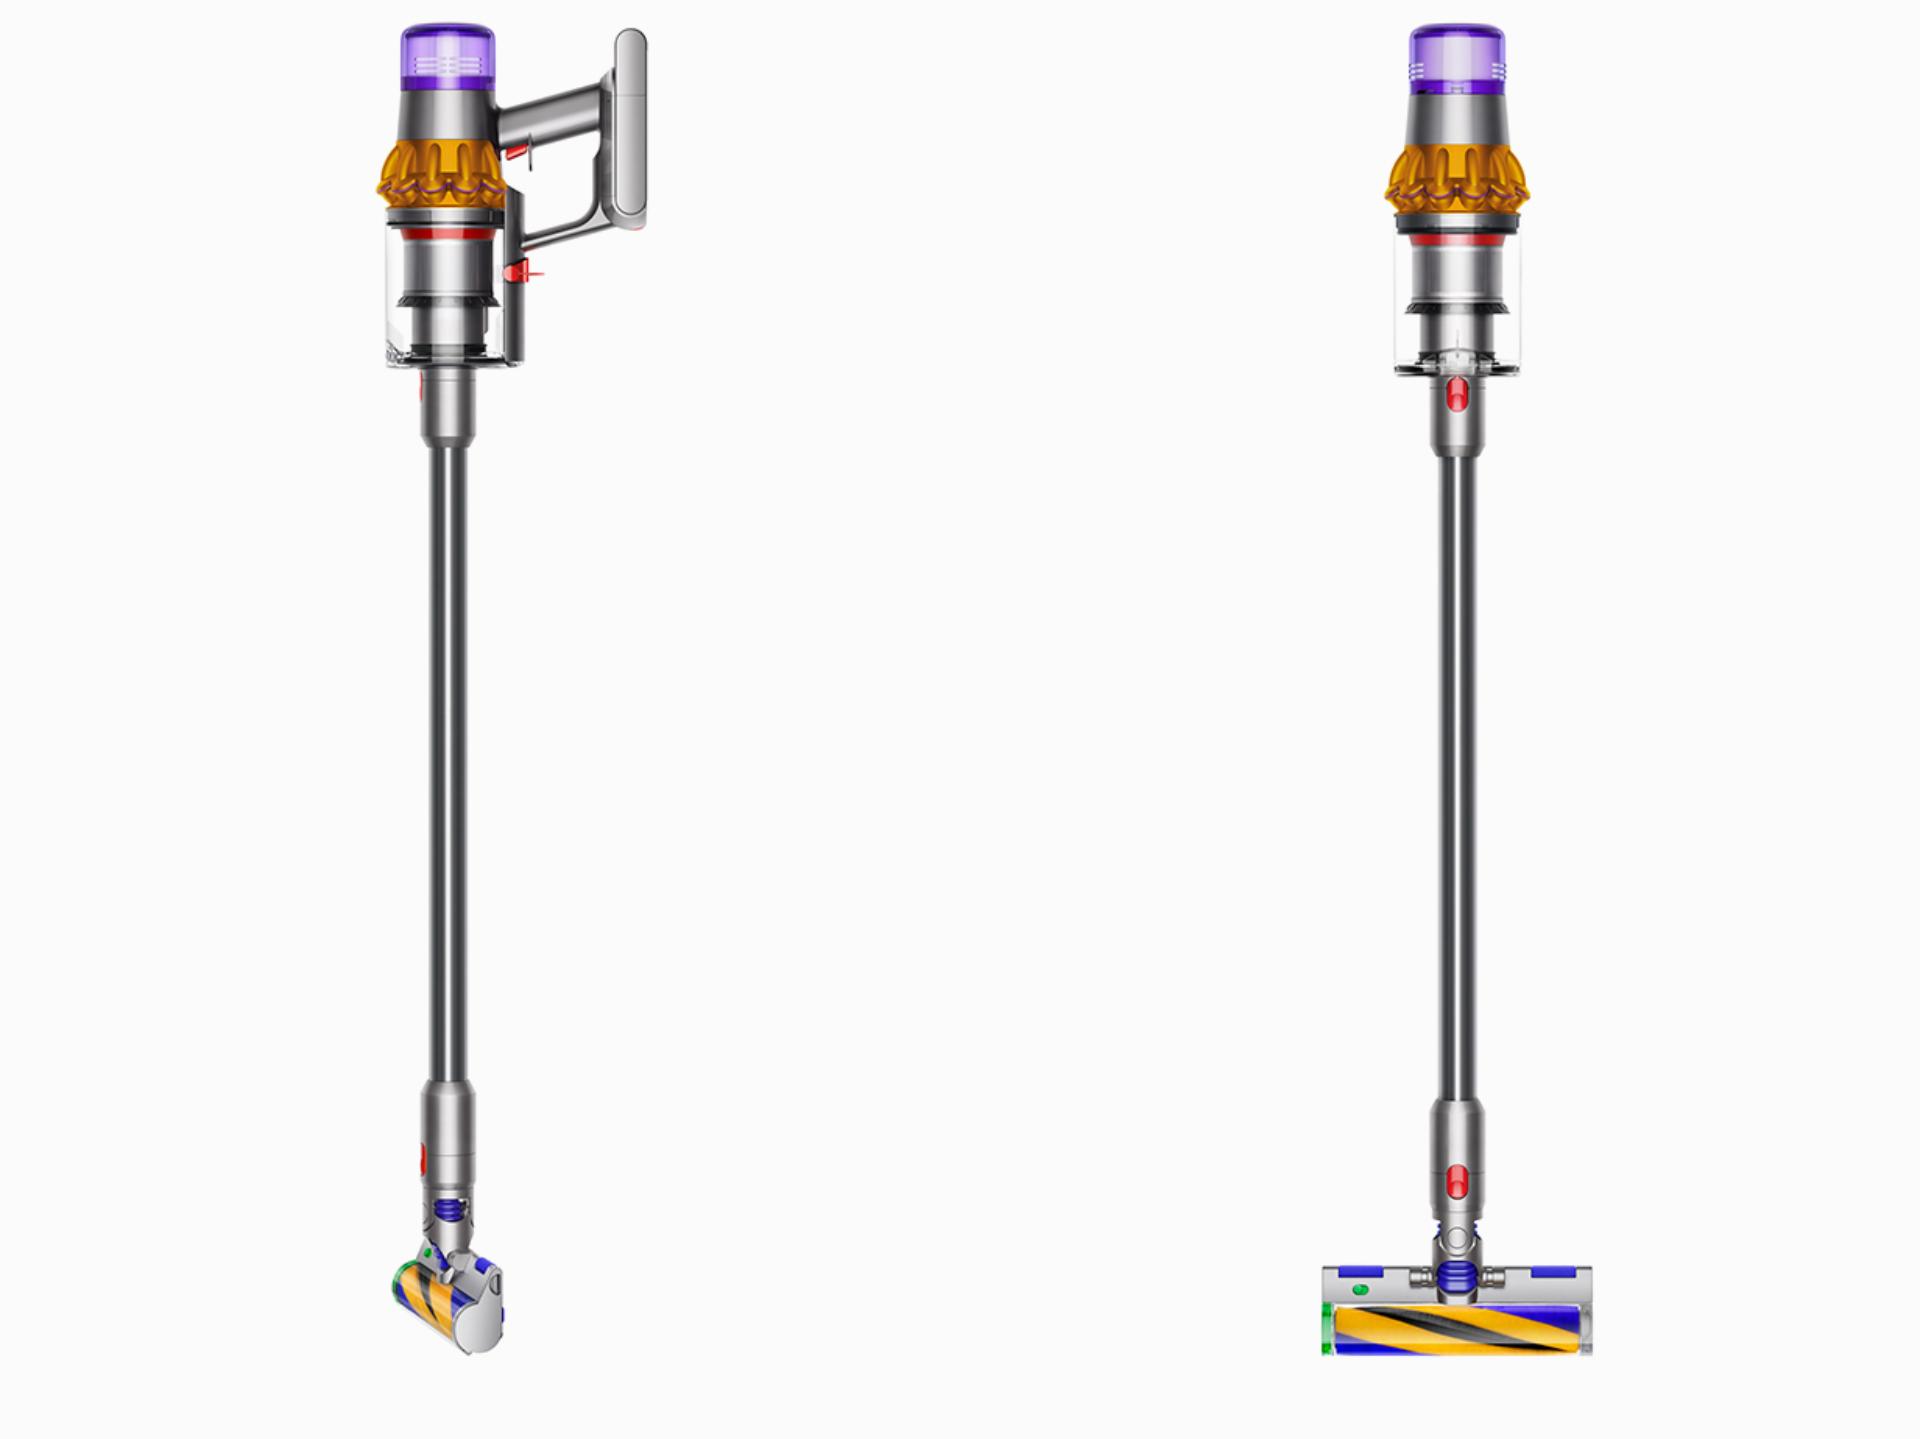 Illustration of Dyson V15 Detect vaccum cleaner dimensions